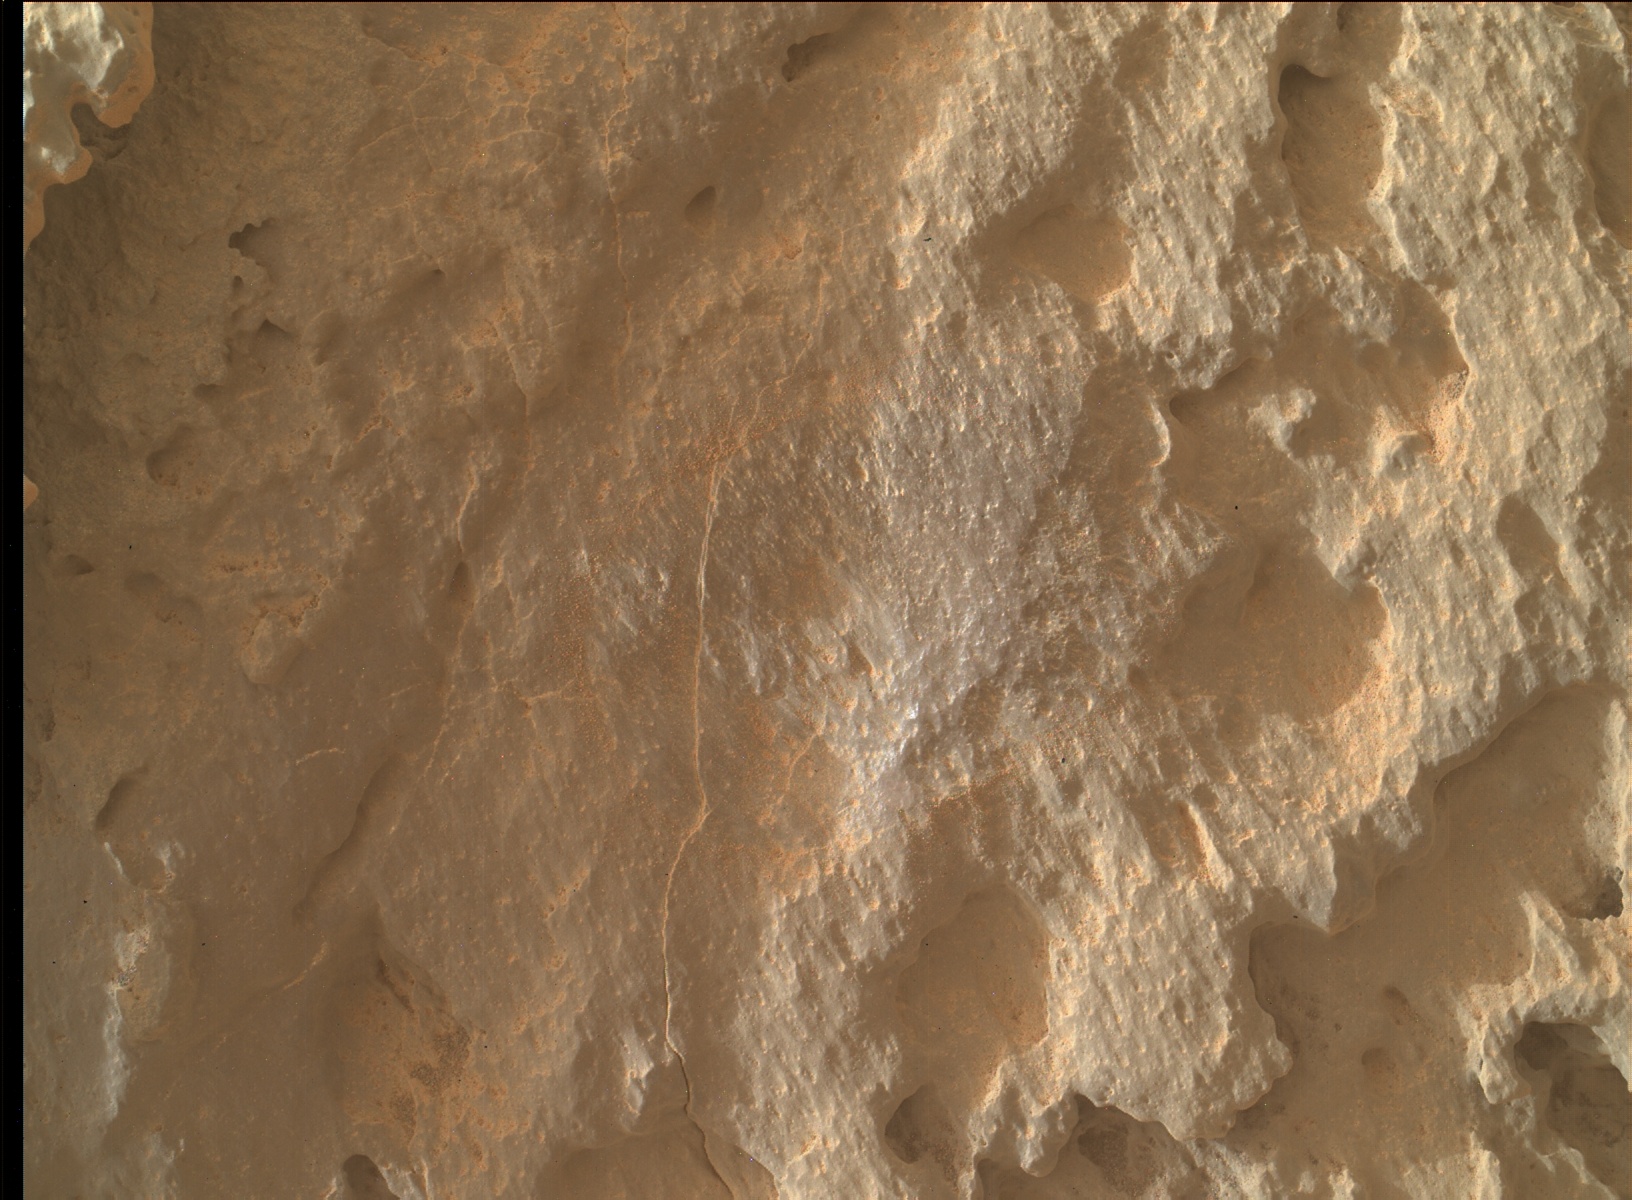 Nasa's Mars rover Curiosity acquired this image using its Mars Hand Lens Imager (MAHLI) on Sol 3641